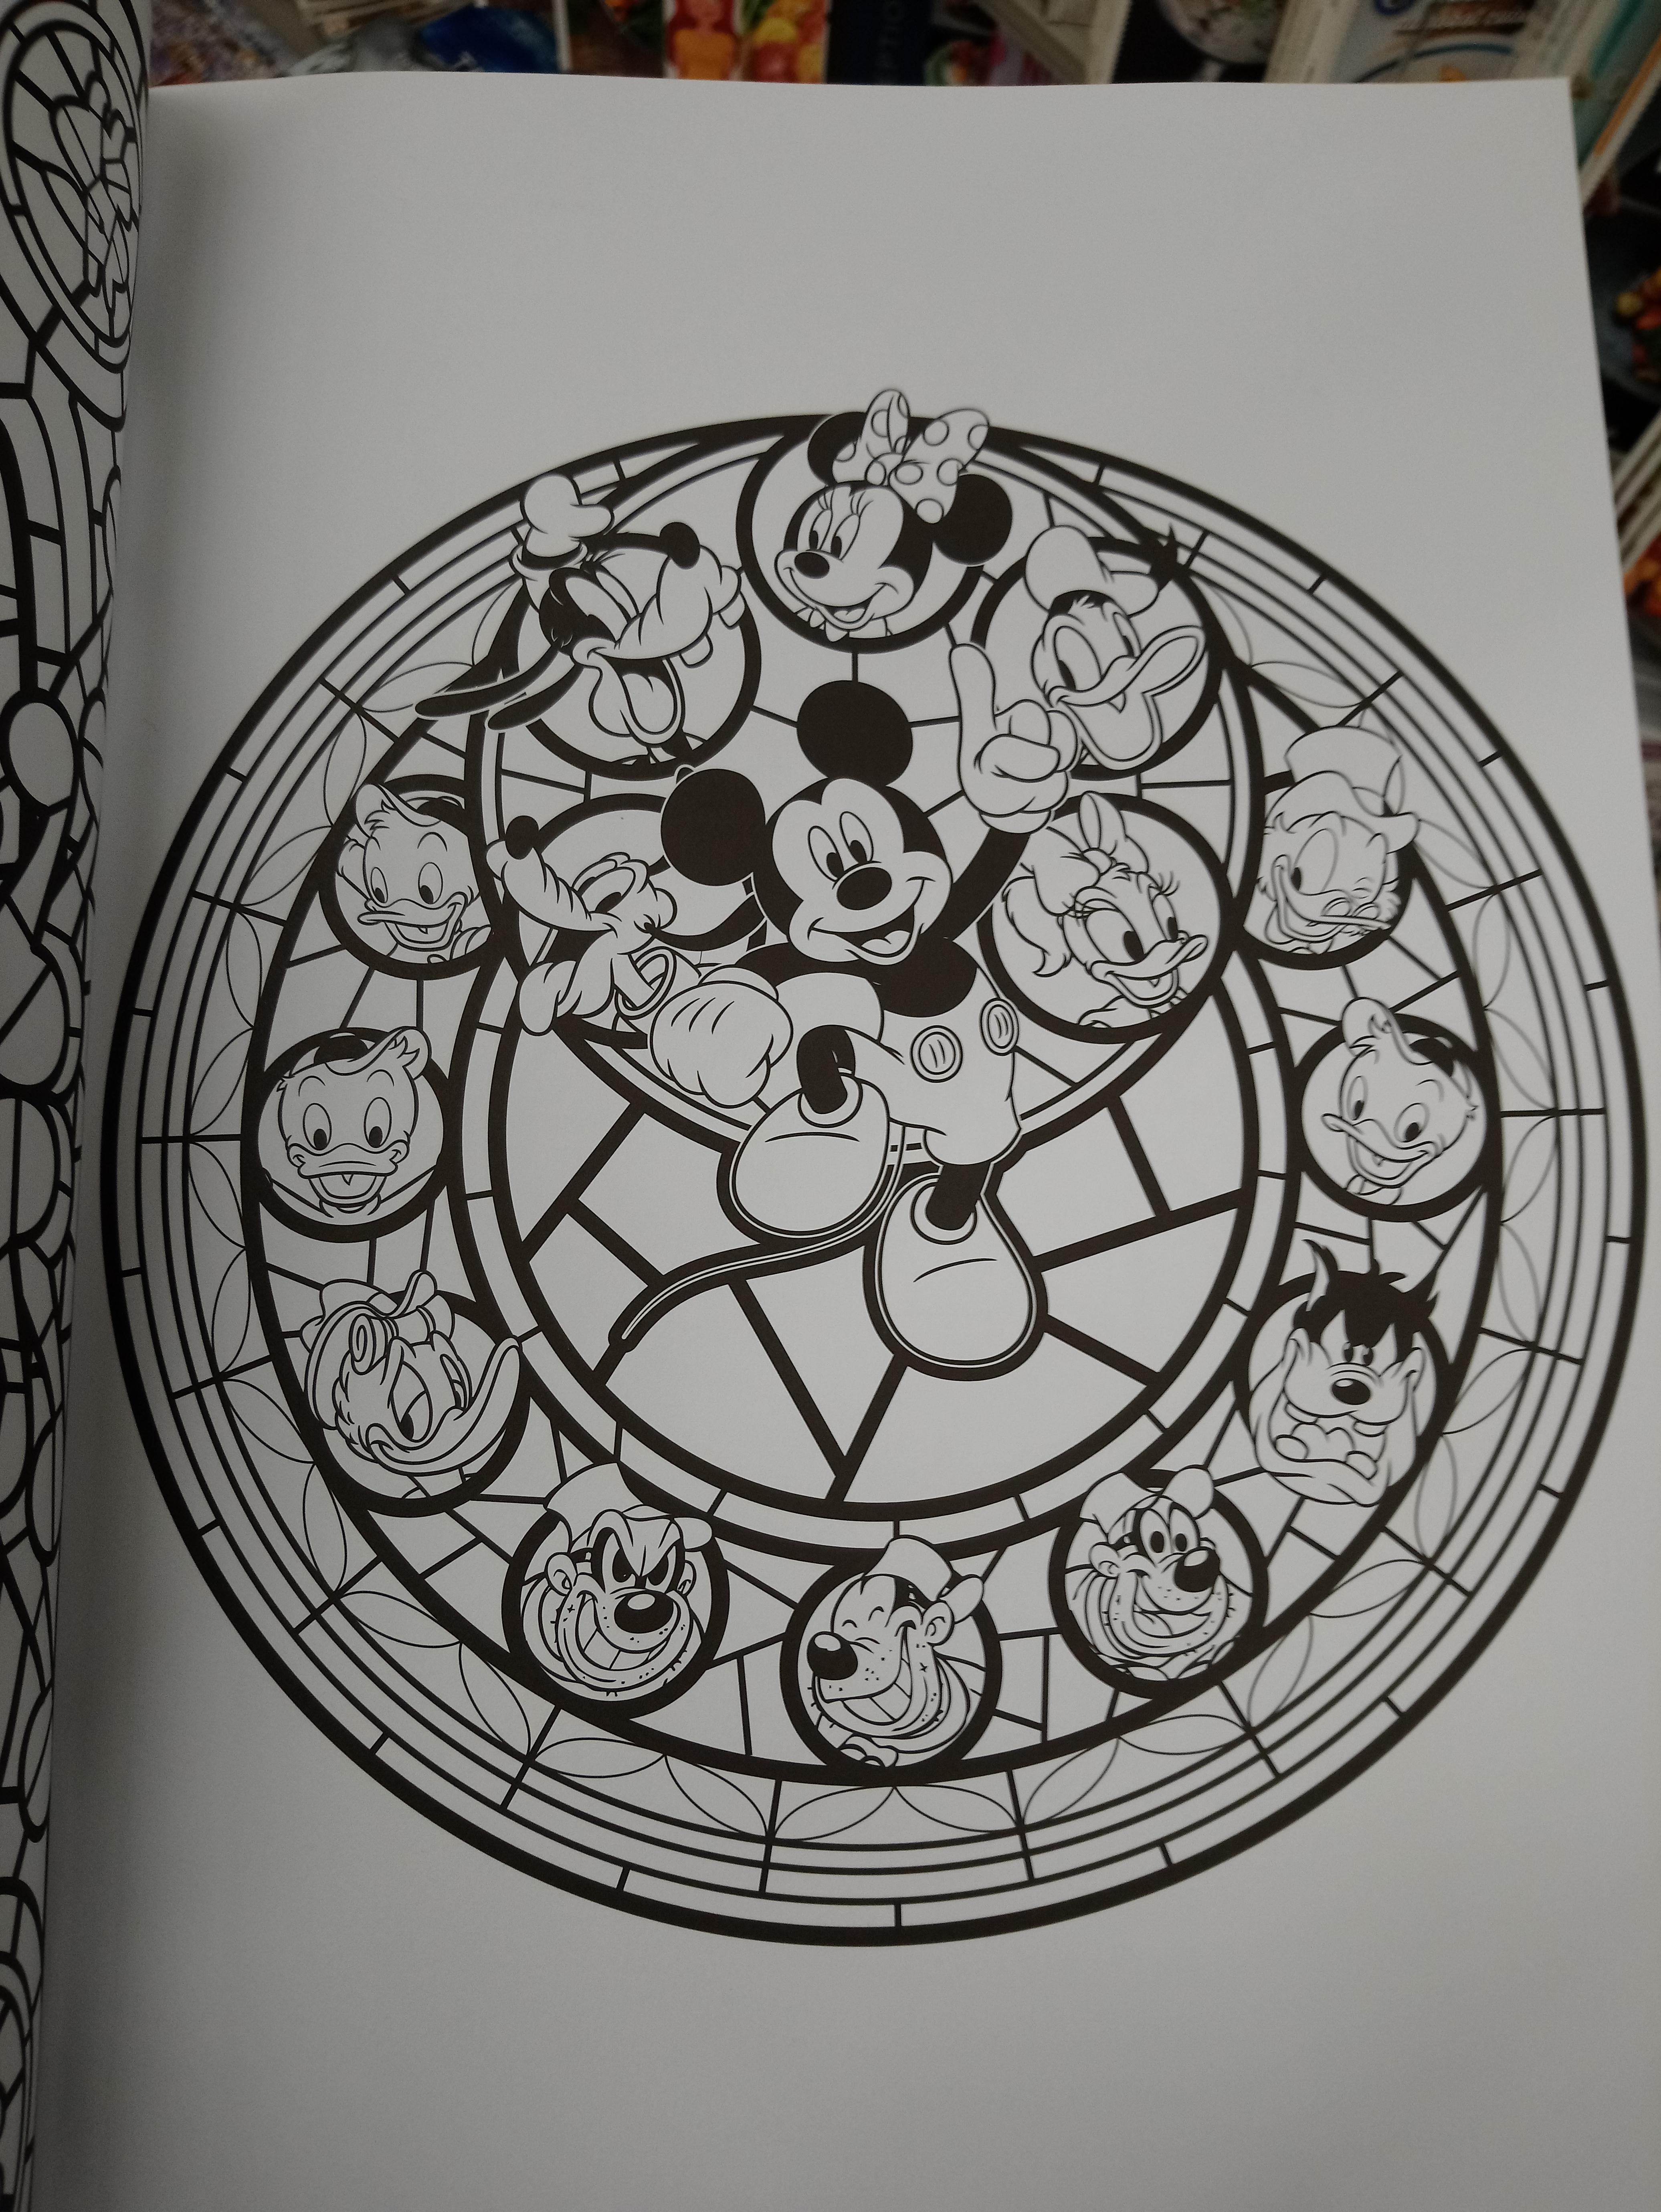 Found a coloring book about disney stained glass and is this a kh reference rkingdomhearts